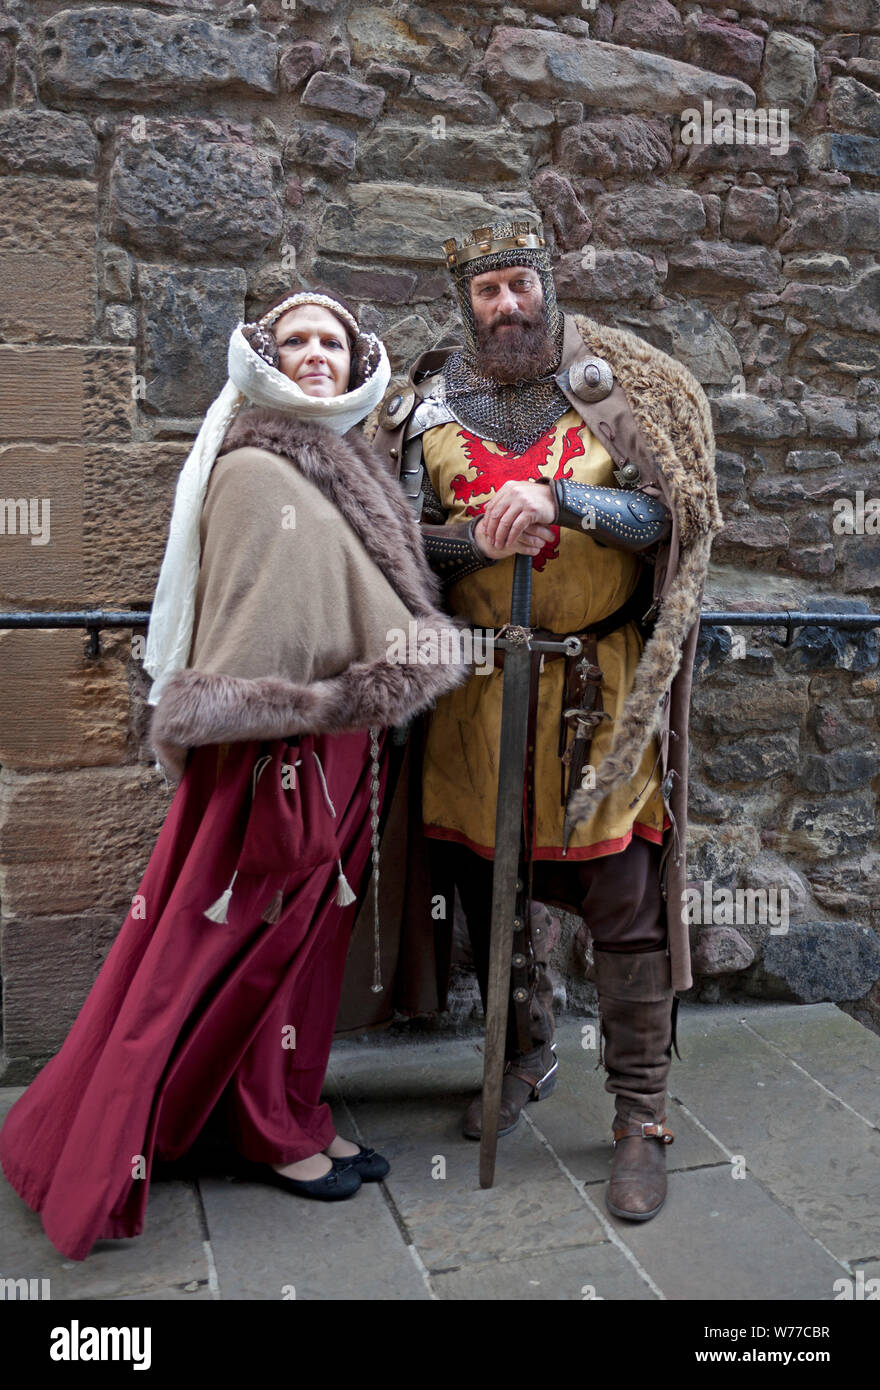 Castlehill, Edinburgh, Scotland, UK. 5th August 2019. King Robert The Bruce and Queen Elizabeth regal story tellers promoting the history of Scotland to visitors and residents of the city spotted at entrance to Edinburgh Castle. Stock Photo